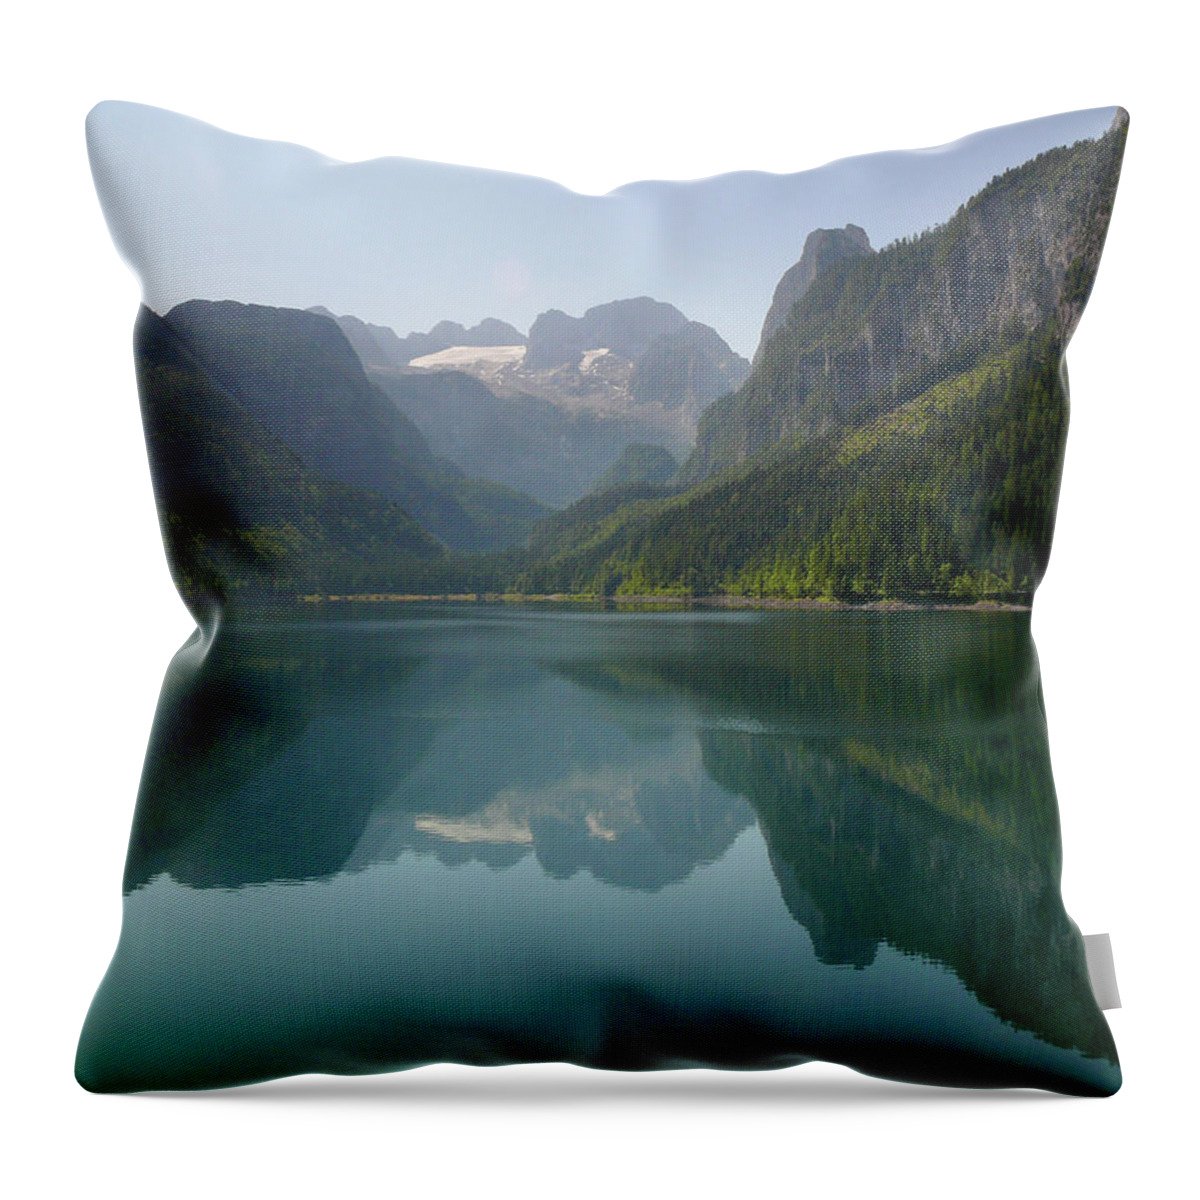 Pristine Throw Pillow featuring the photograph Pristine by Evelyn Tambour